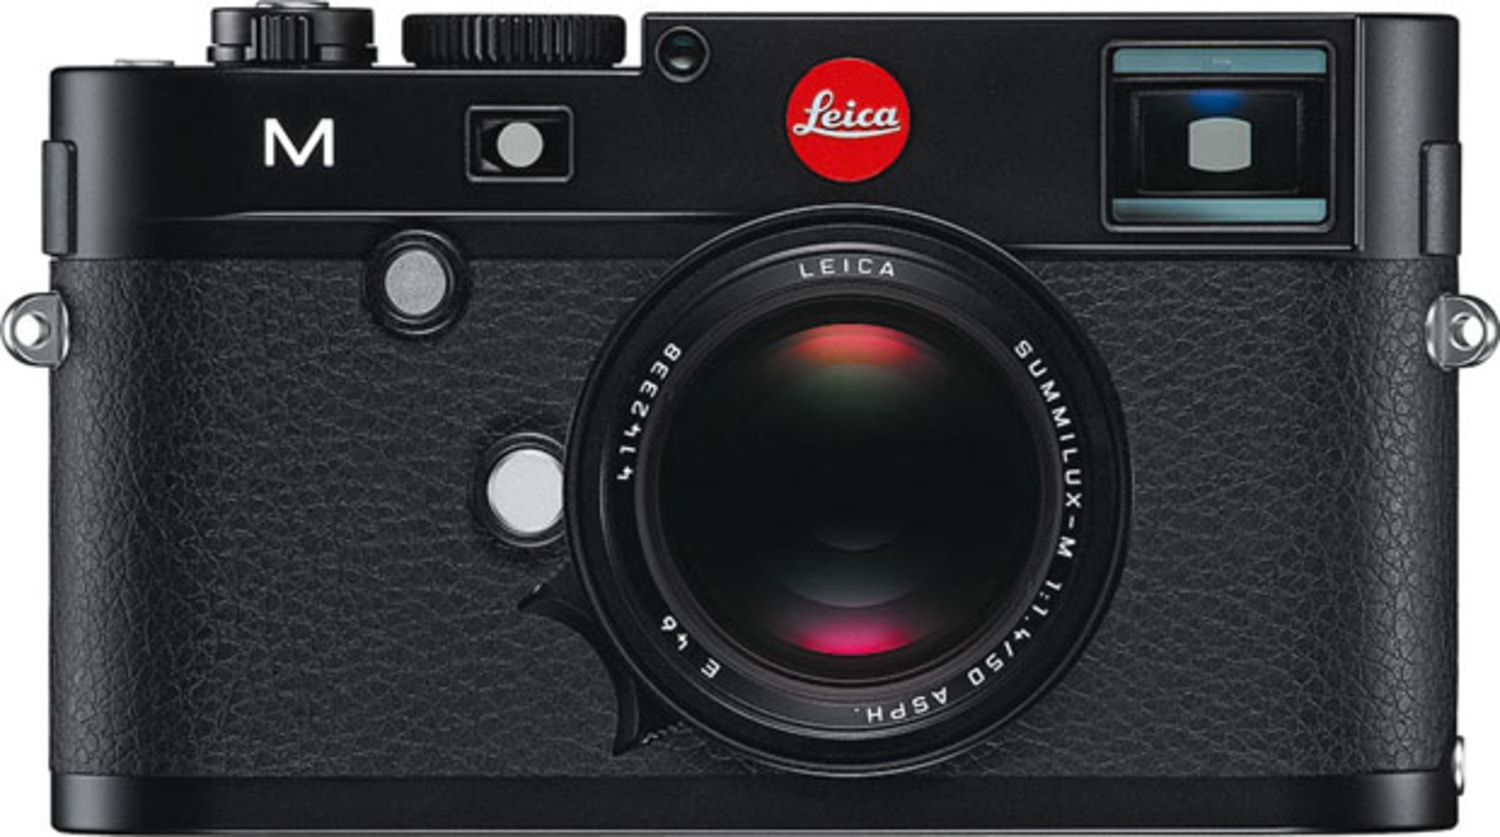 Leica camera by Jonathan Ive